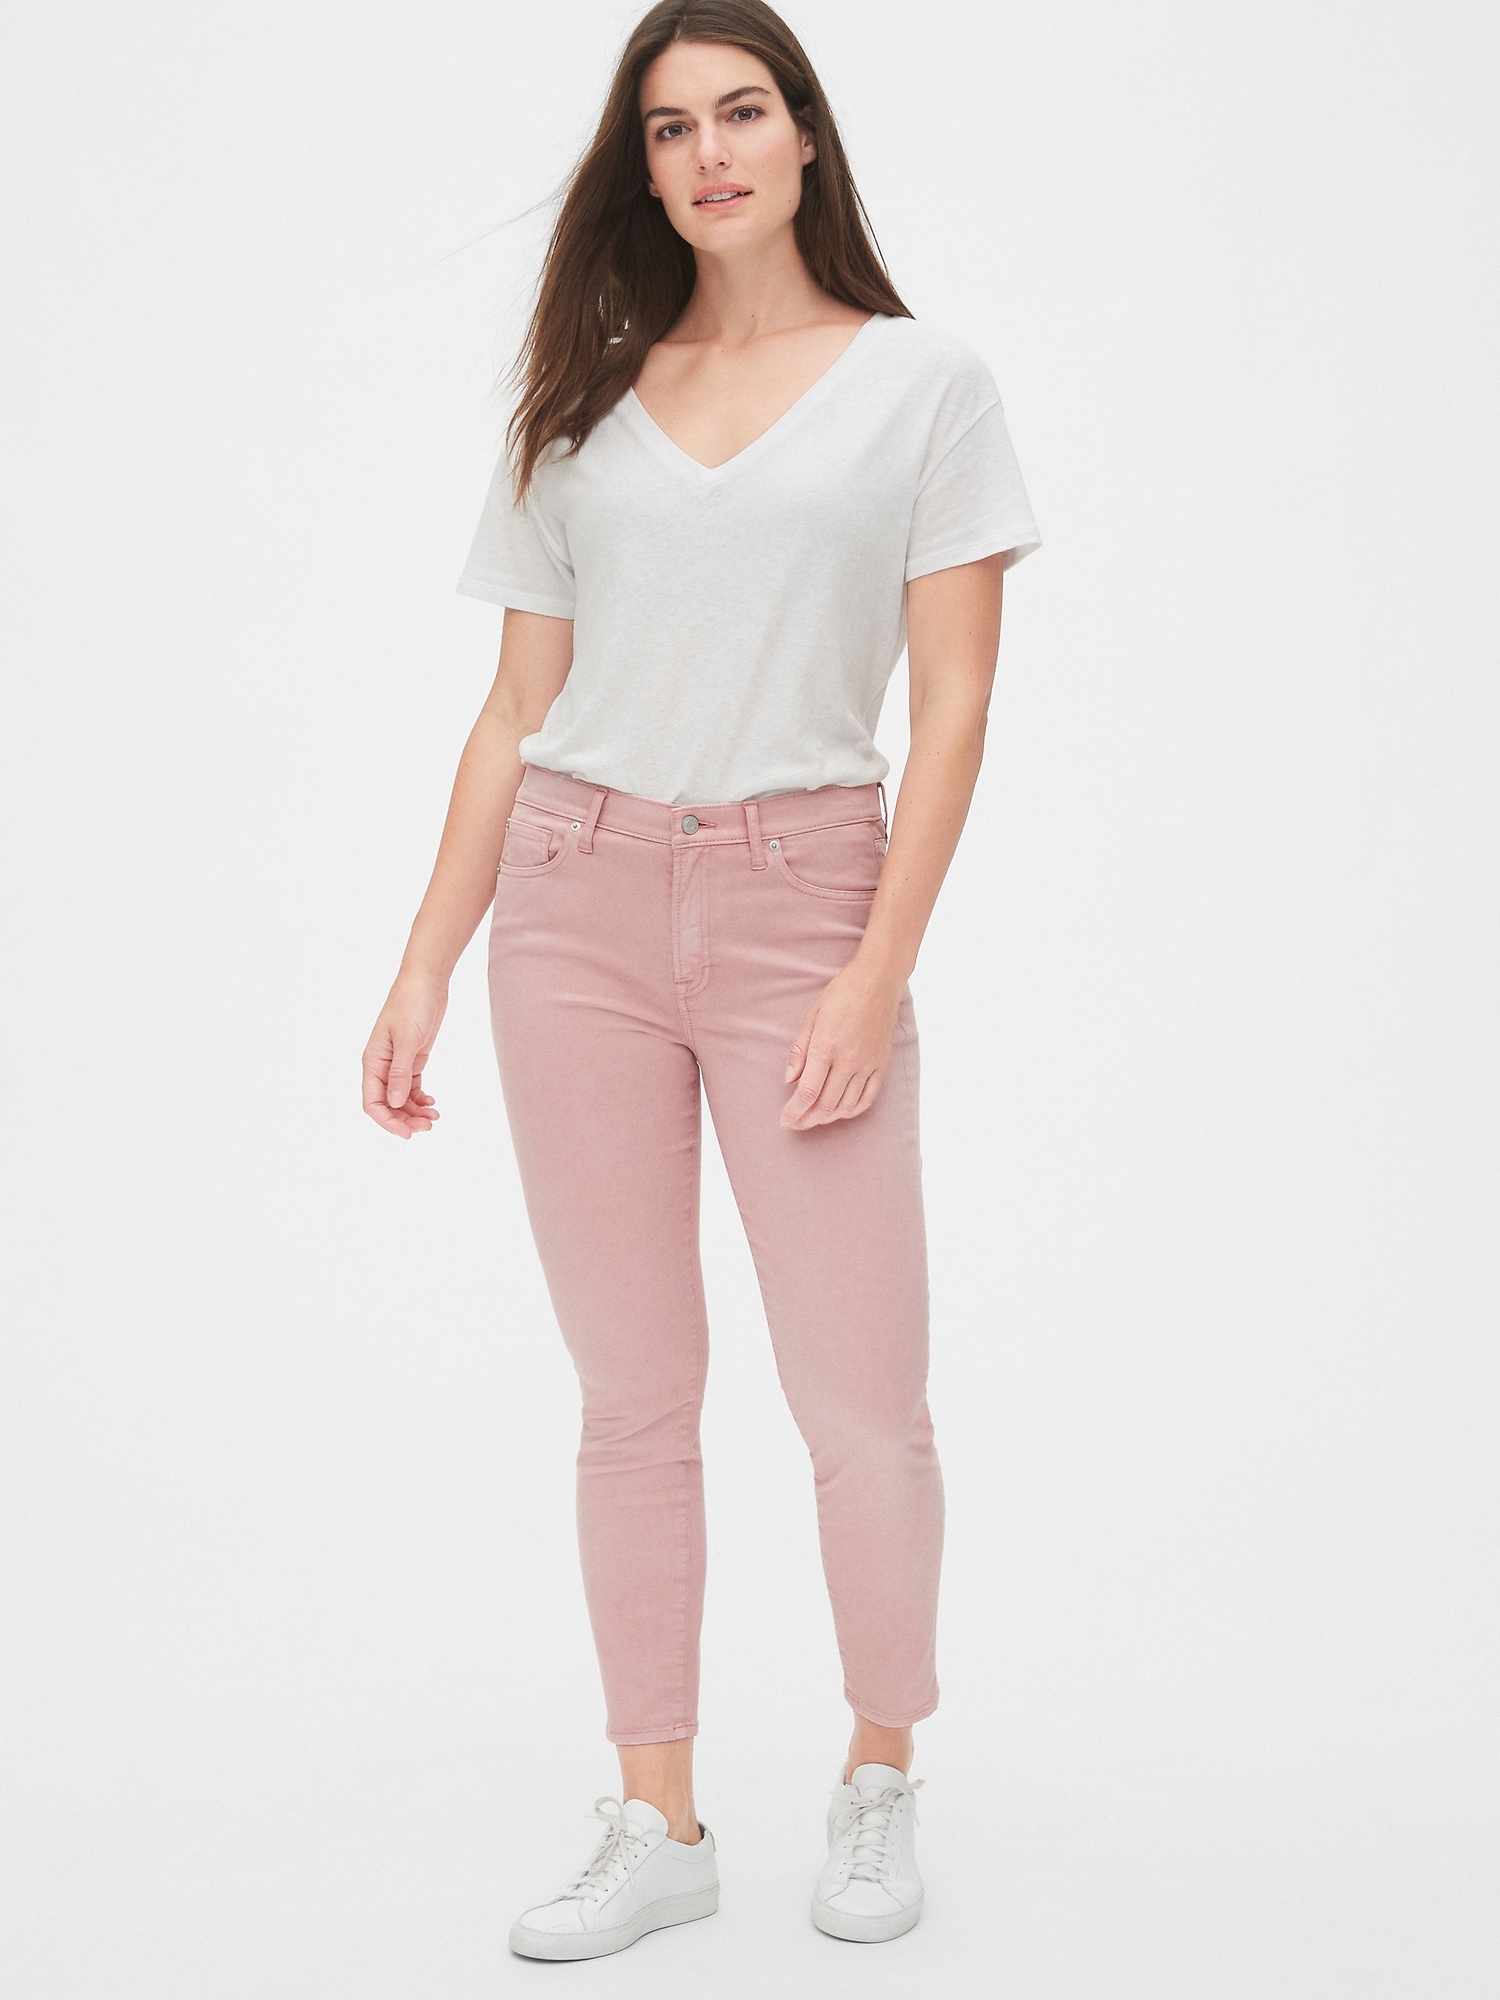 pink ankle jeans